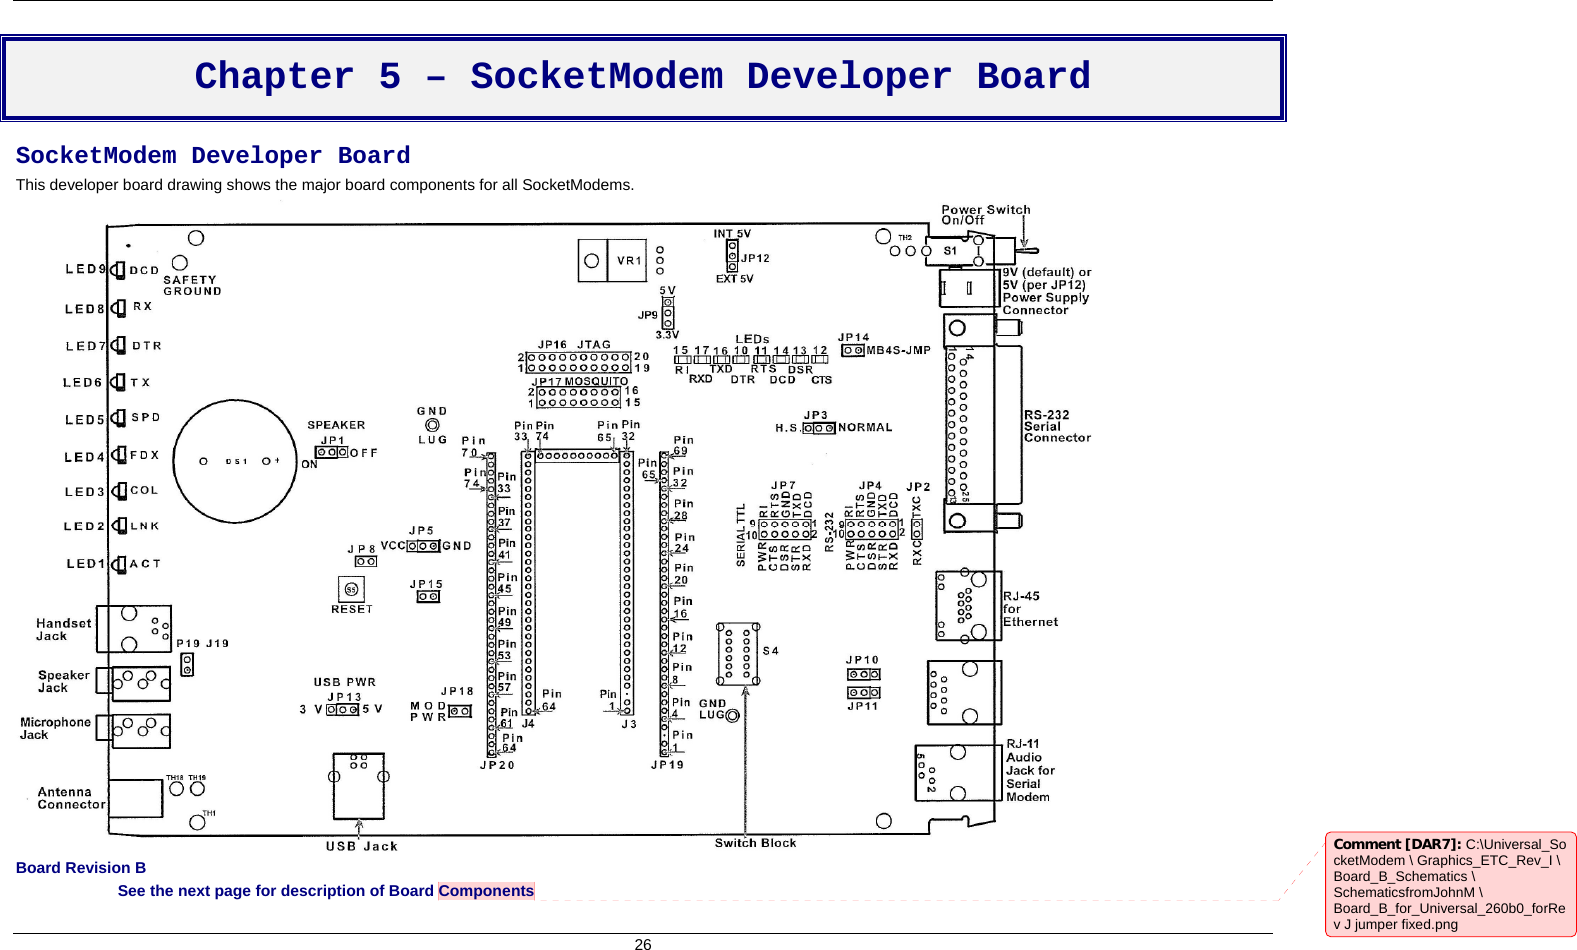  26  Chapter 5 – SocketModem Developer Board SocketModem Developer Board  This developer board drawing shows the major board components for all SocketModems.   Board Revision B See the next page for description of Board Components Comment [DAR7]: C:\Universal_SocketModem \ Graphics_ETC_Rev_I \ Board_B_Schematics \ SchematicsfromJohnM \ Board_B_for_Universal_260b0_forRev J jumper fixed.png  